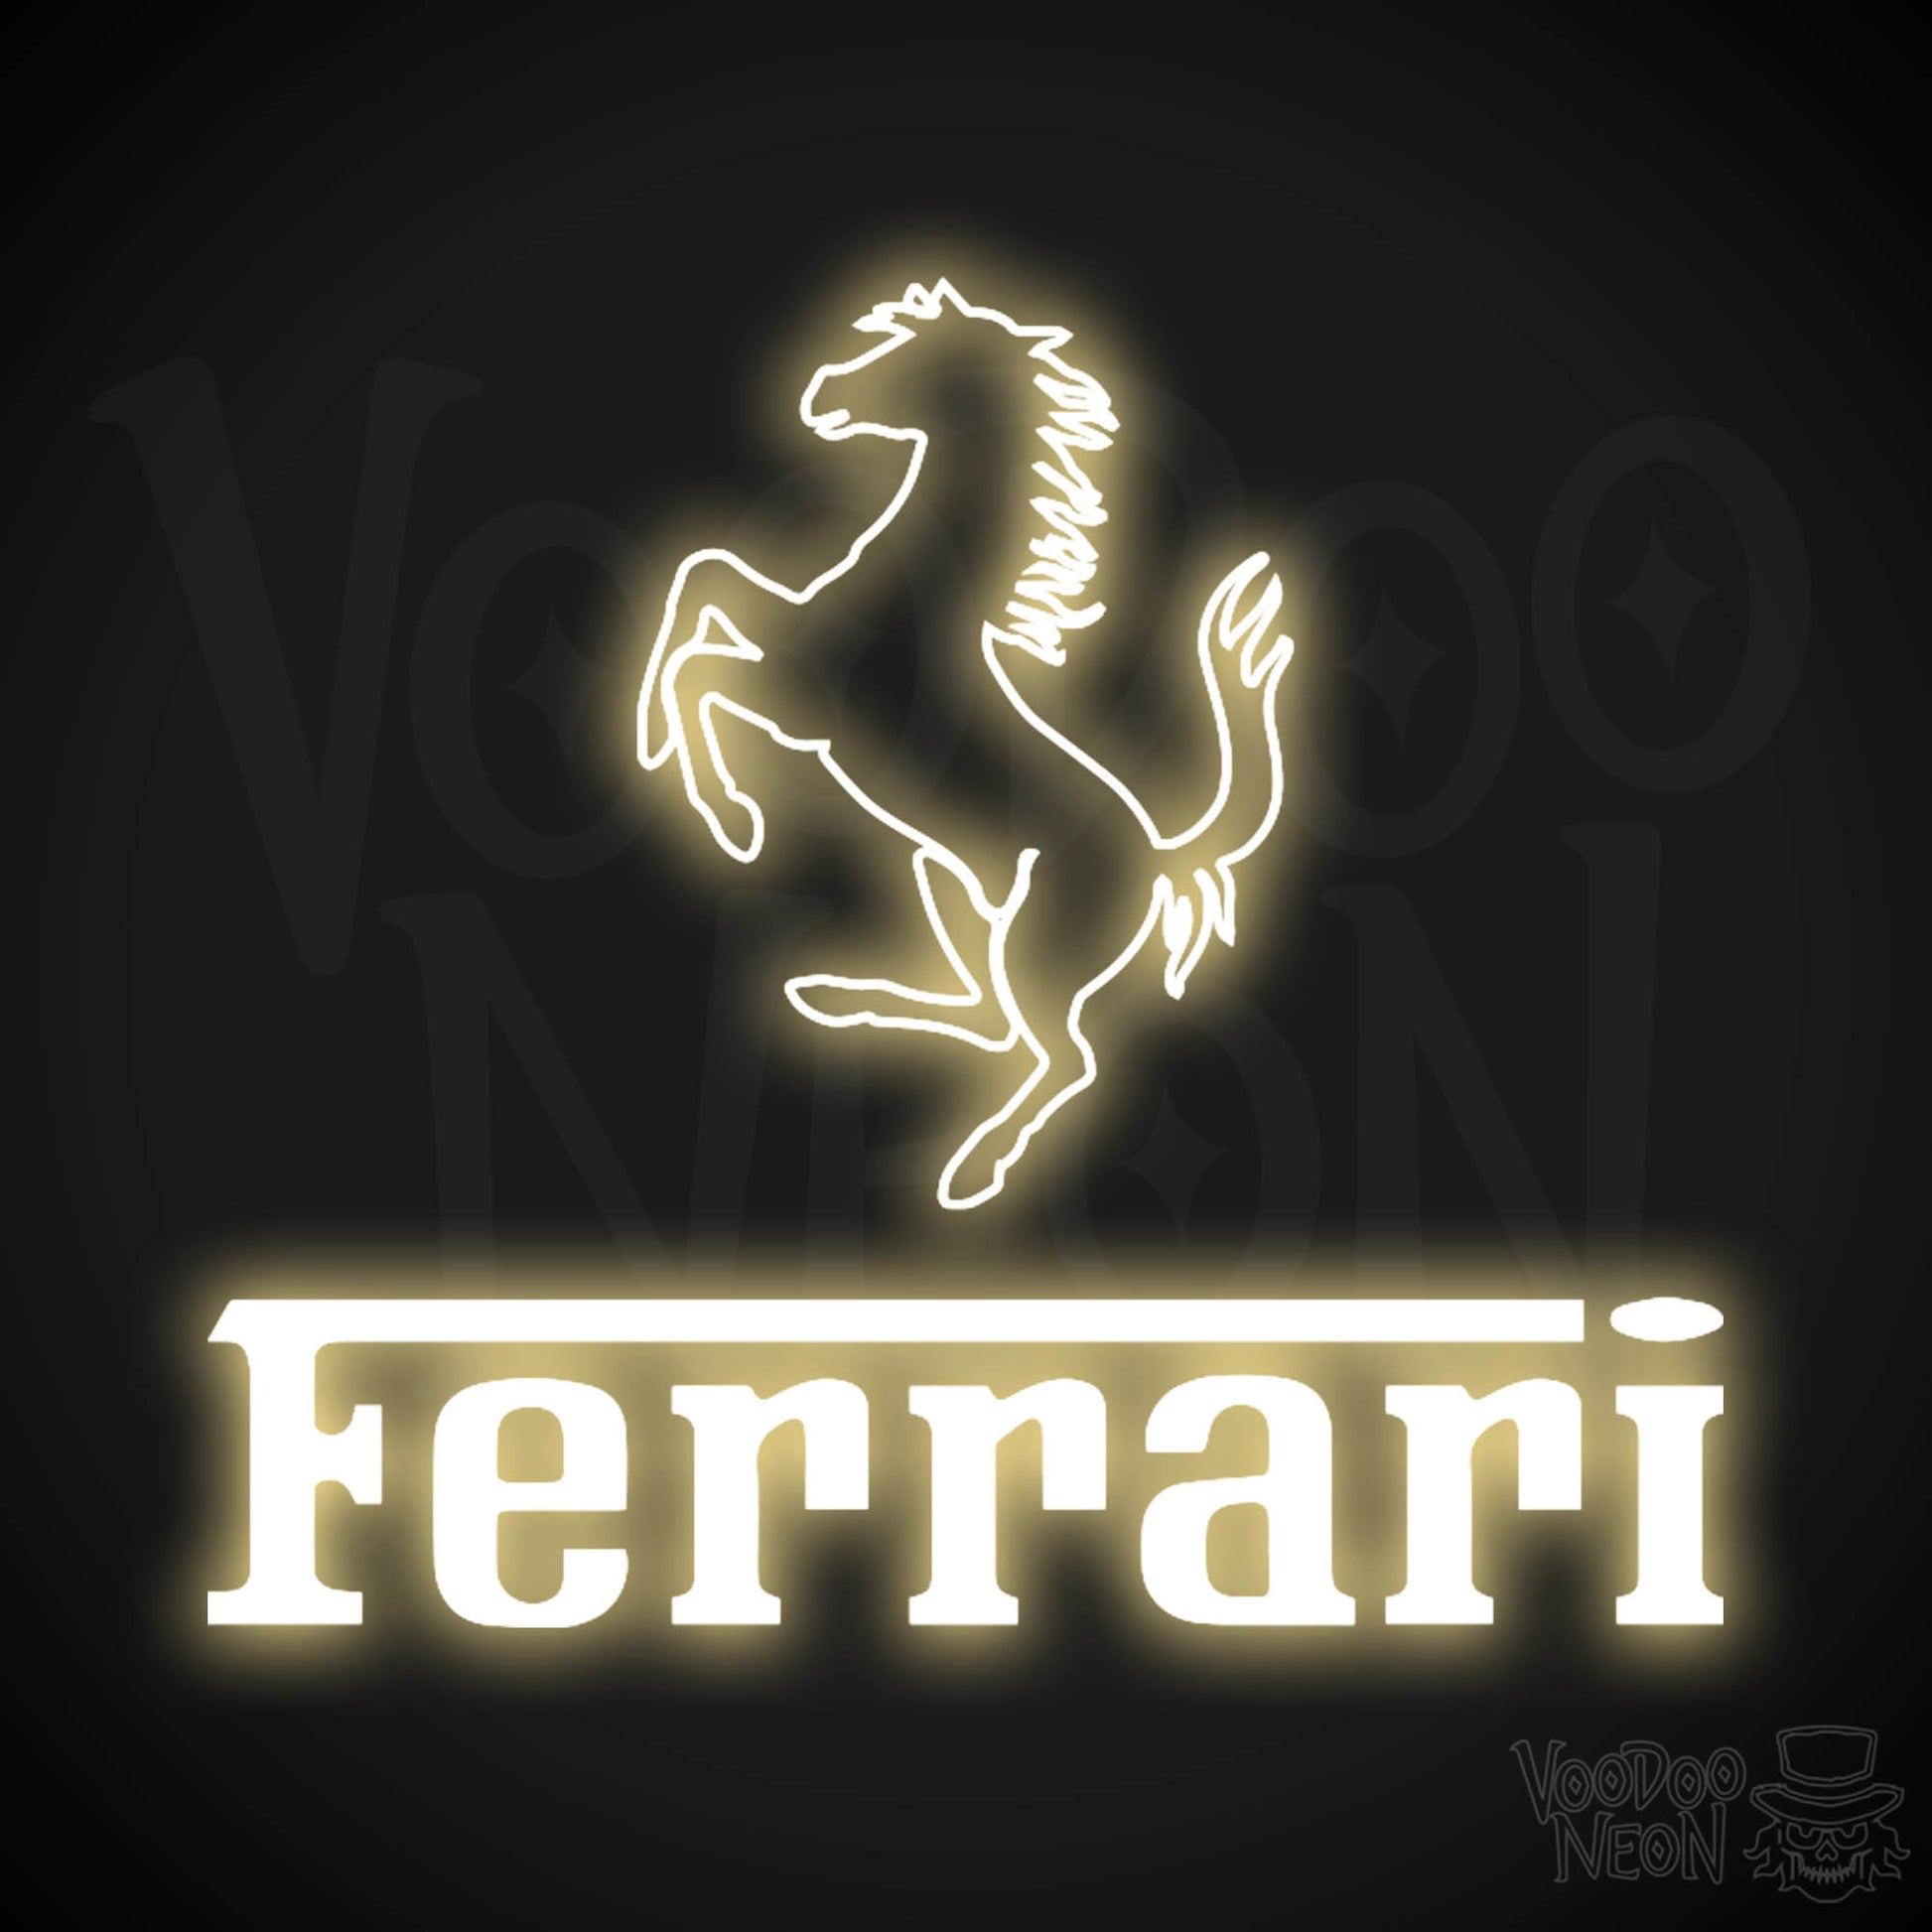 Ferrari Neon Sign - Neon Ferrari Sign - Ferrari Logo Wall Art - Color Warm White